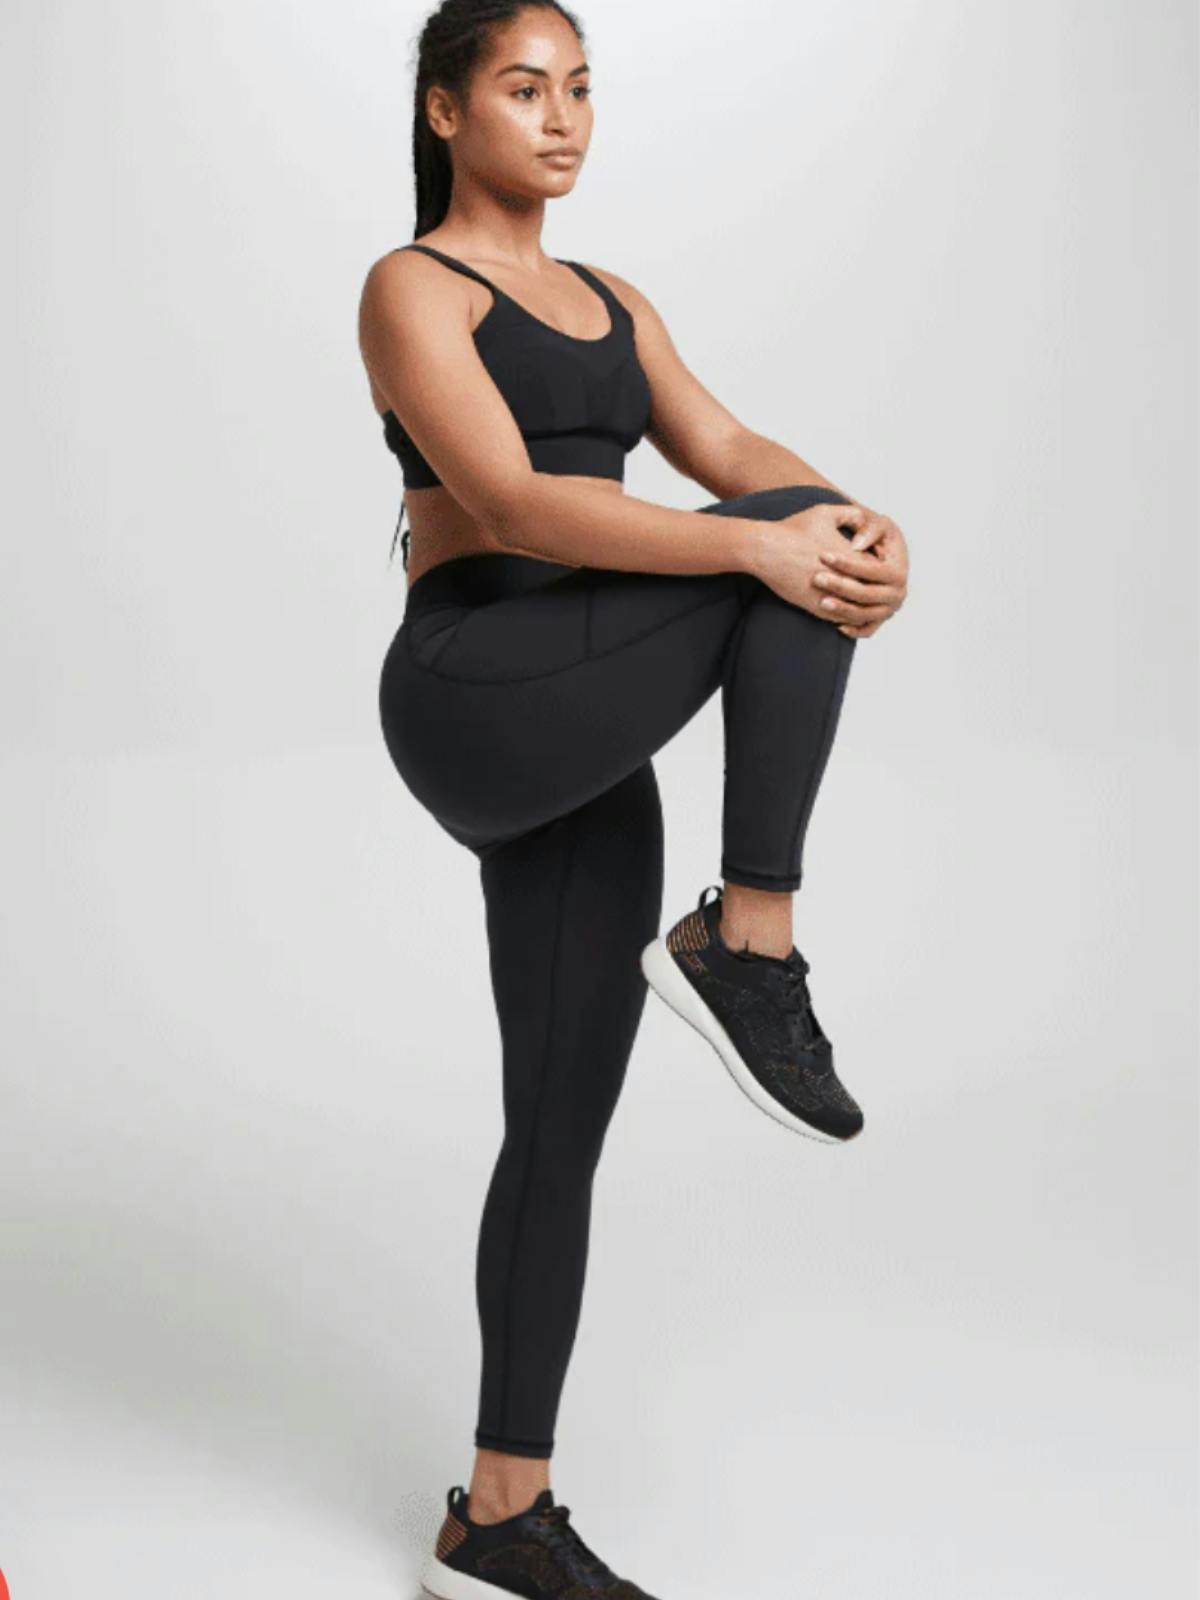 Period Pants & Knickers for All Flow Types | Bodyform™